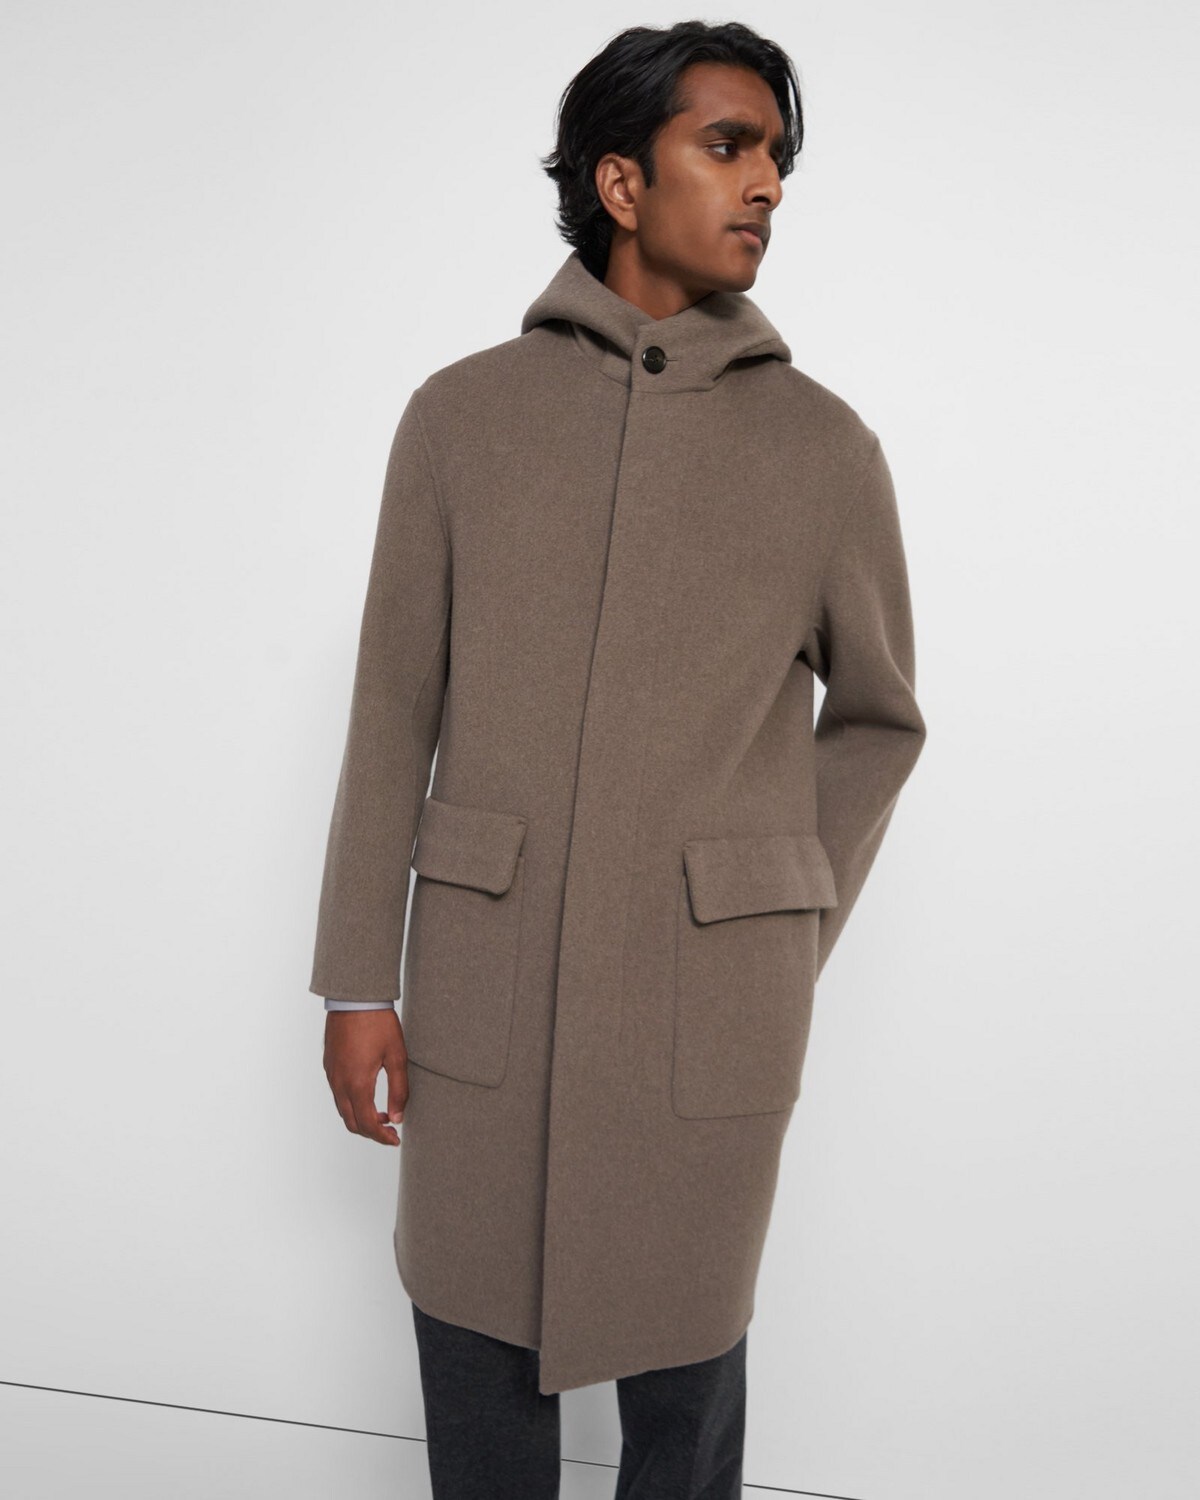 Hooded Coat in Double-Face Wool-Cashmere